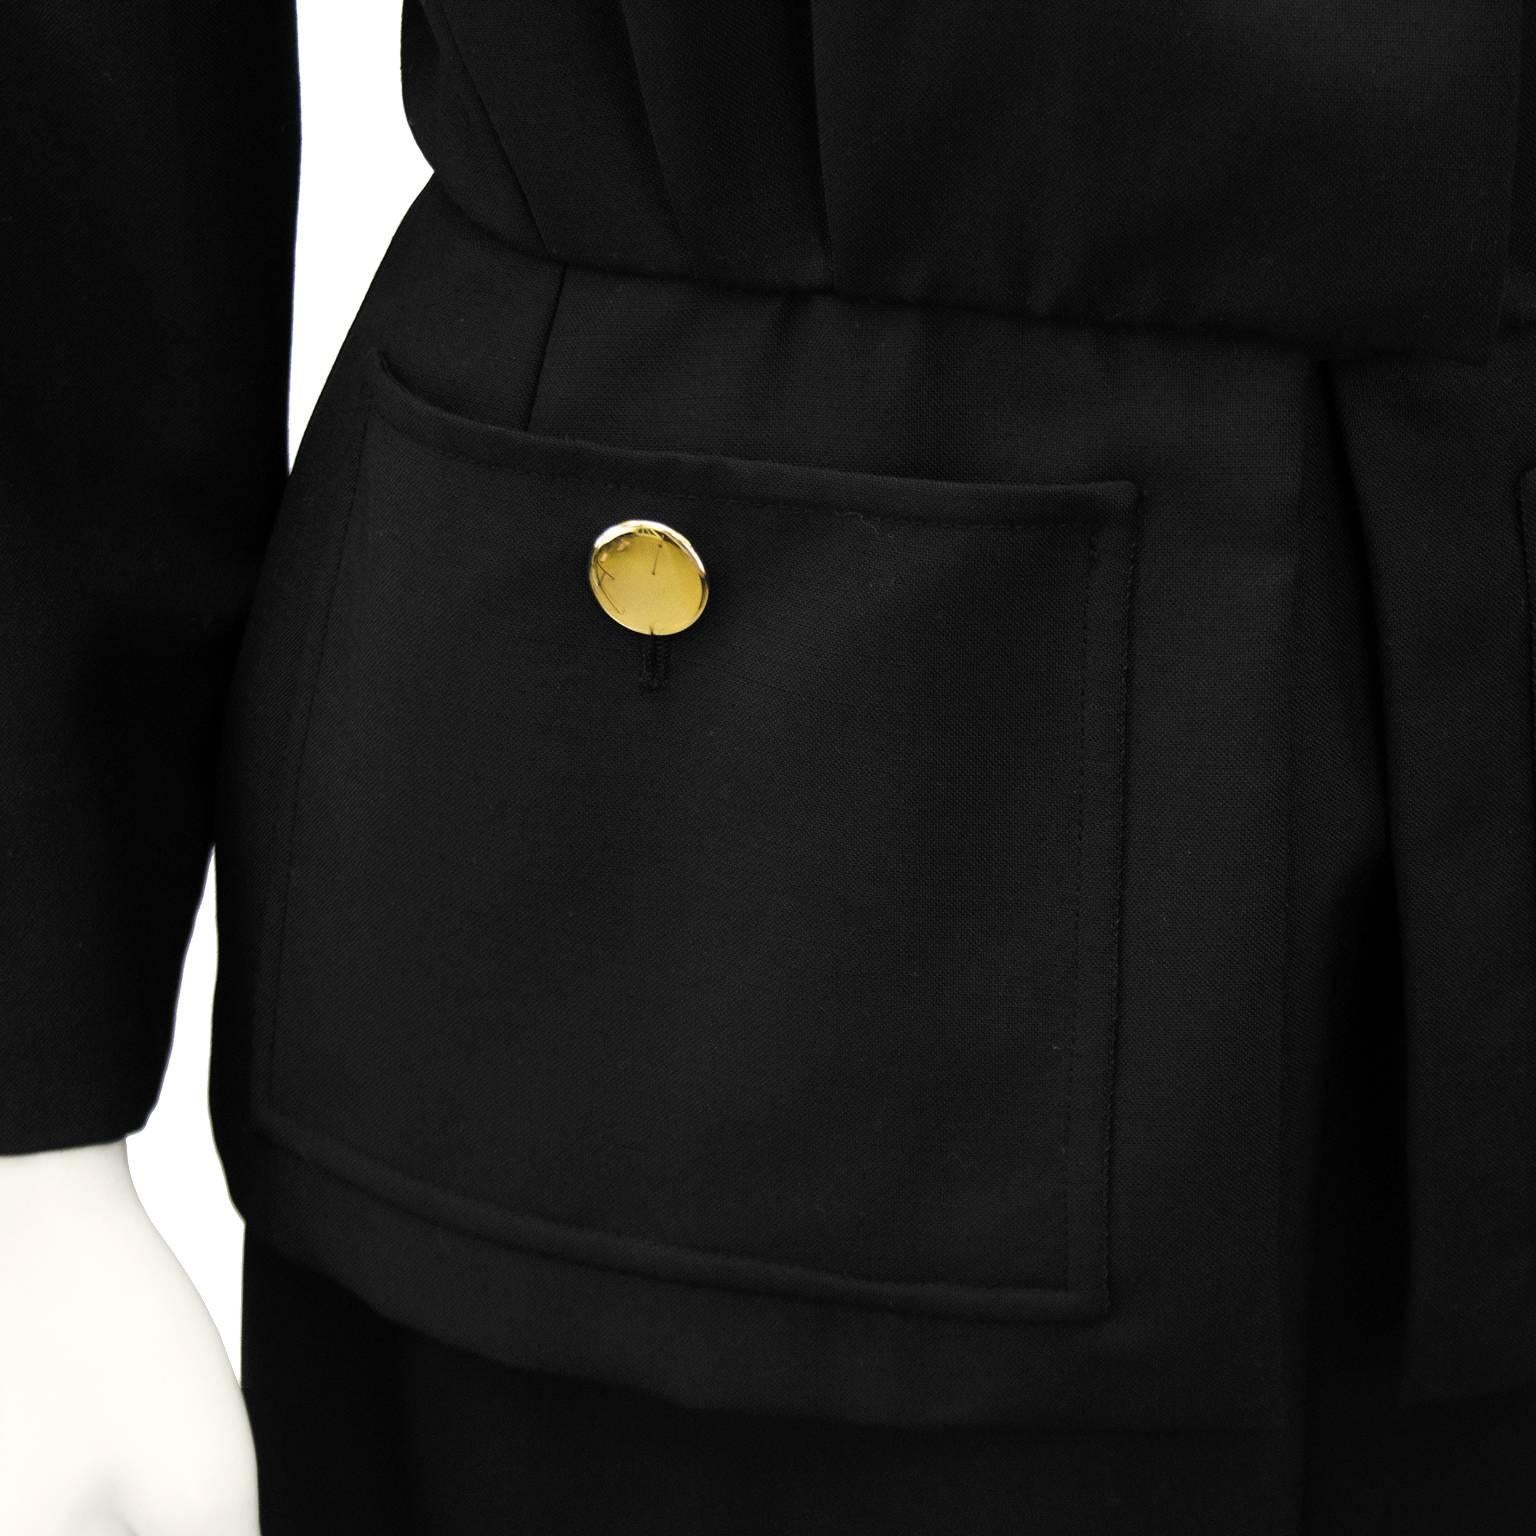 1980s Yves Saint Laurent/YSL Black Skirt Suit with Peplum In Excellent Condition For Sale In Toronto, Ontario